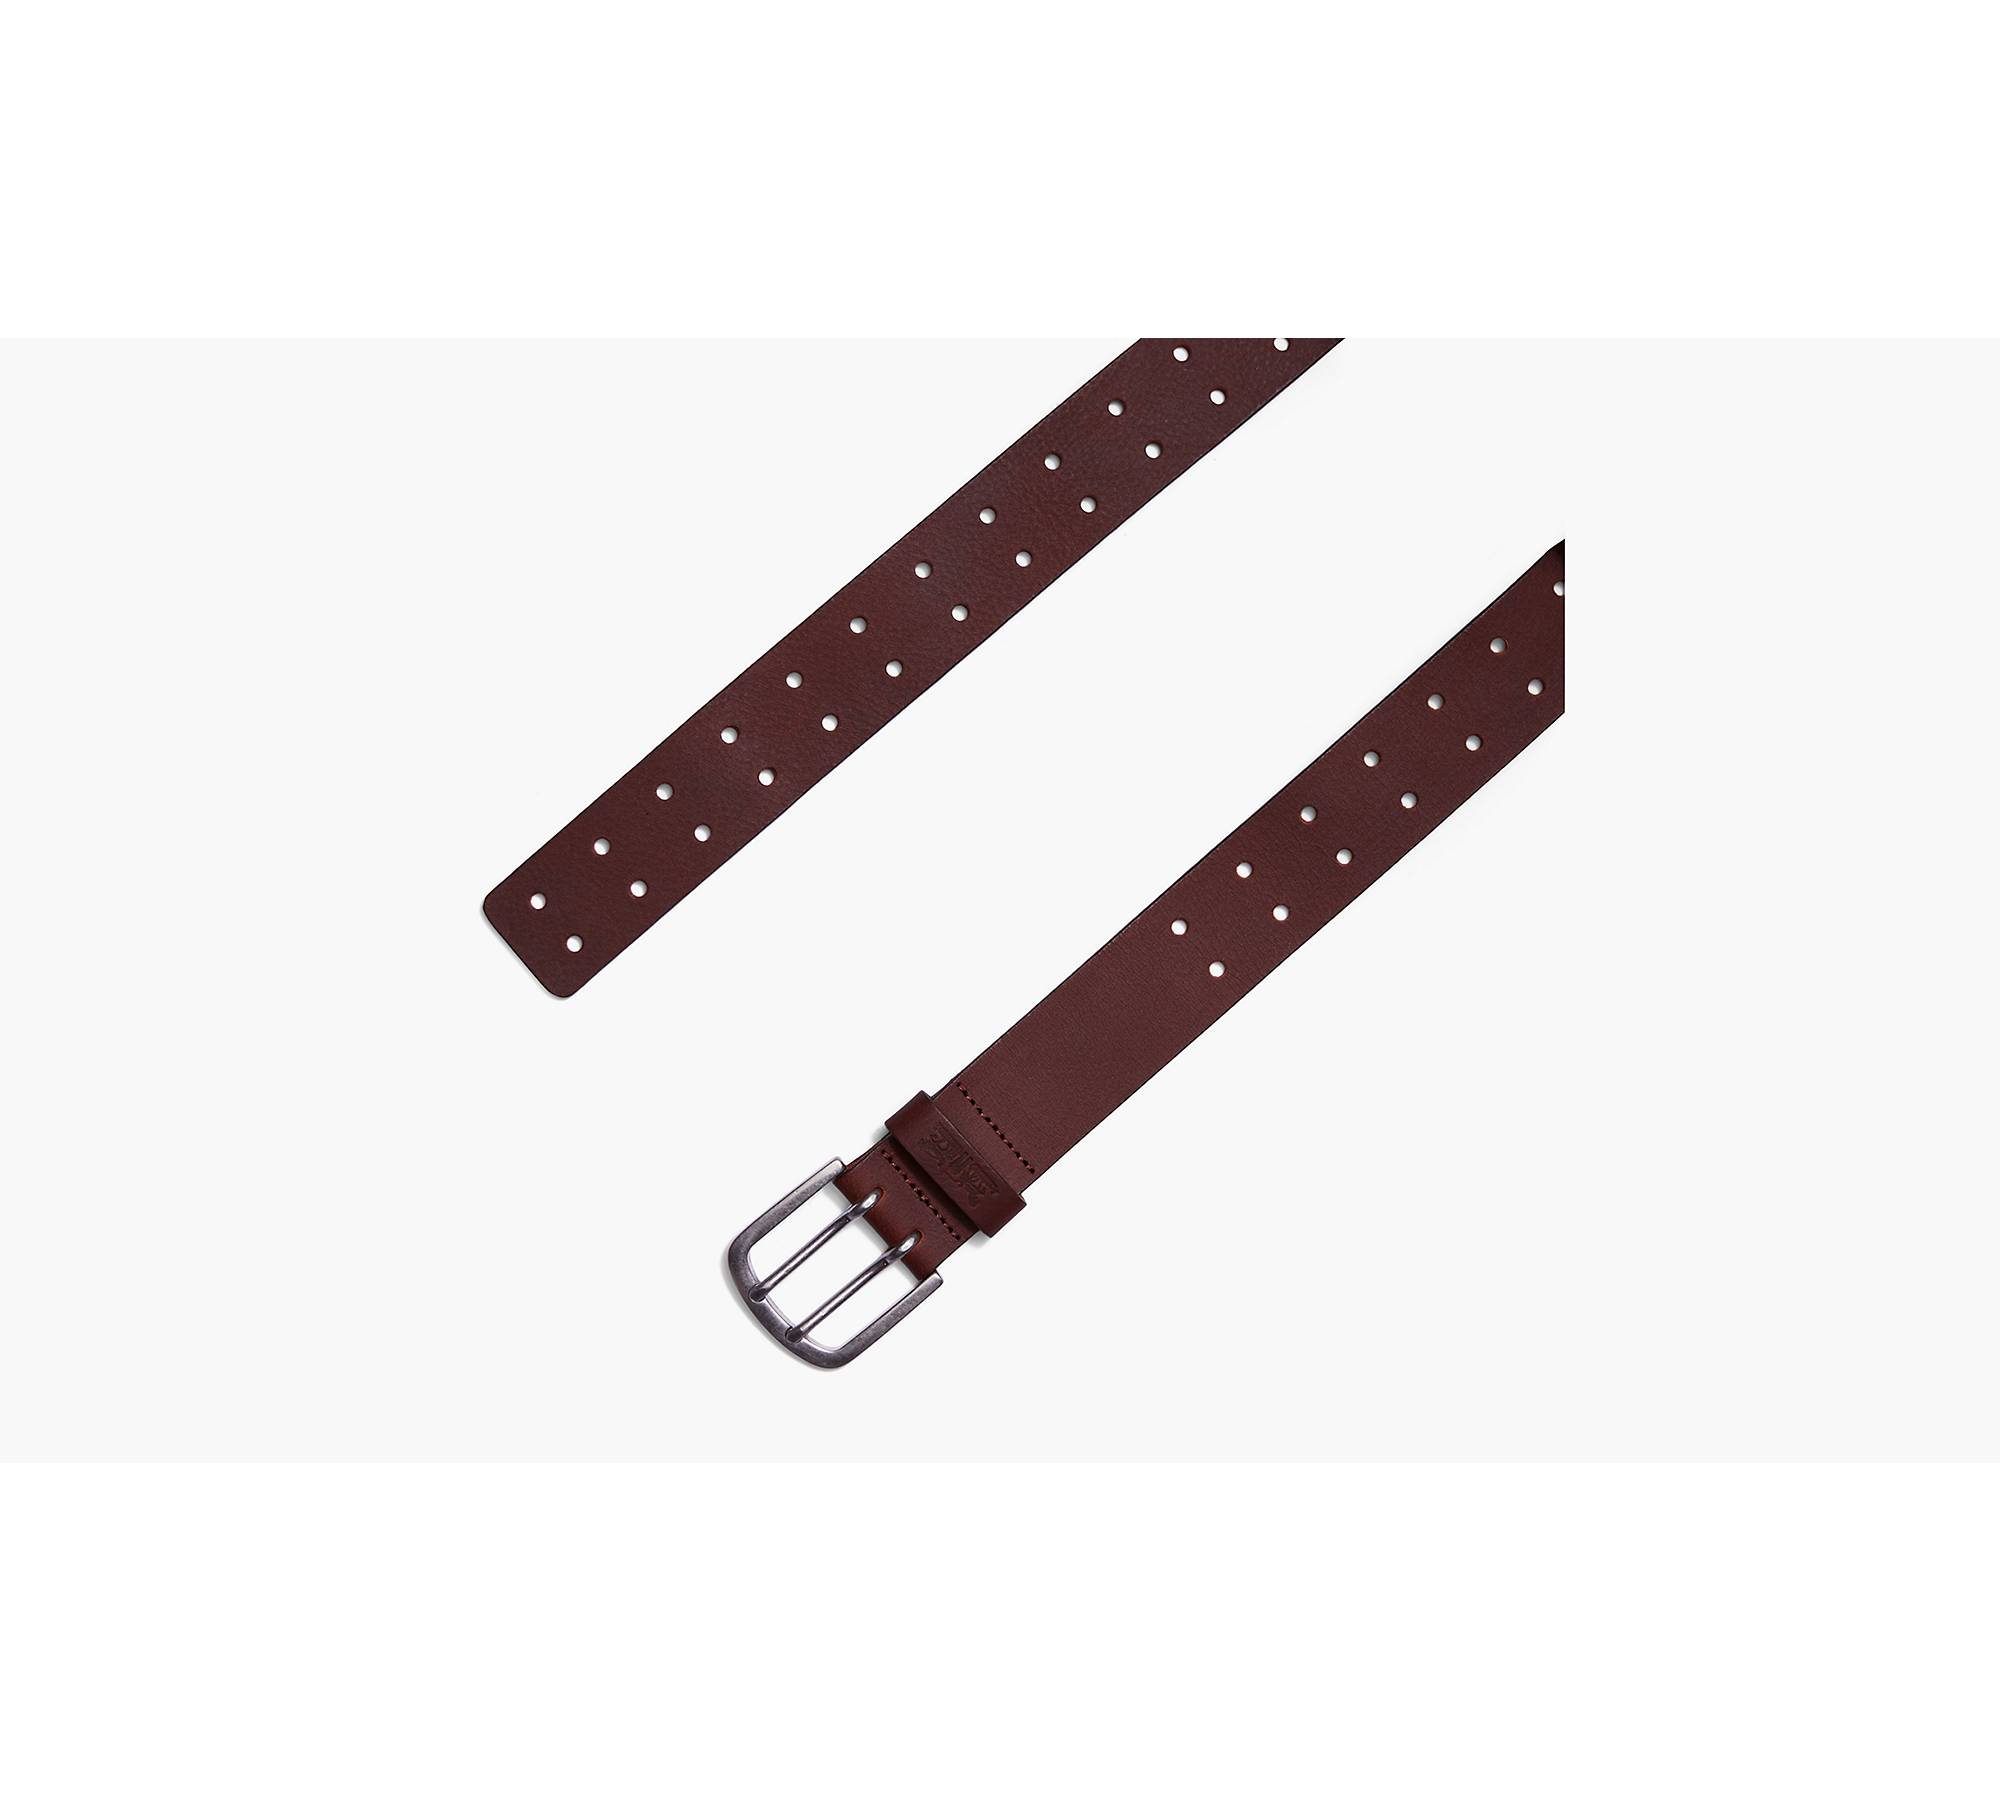 Double Adjustable PU Leather Strap Belt Replacement for Louis 